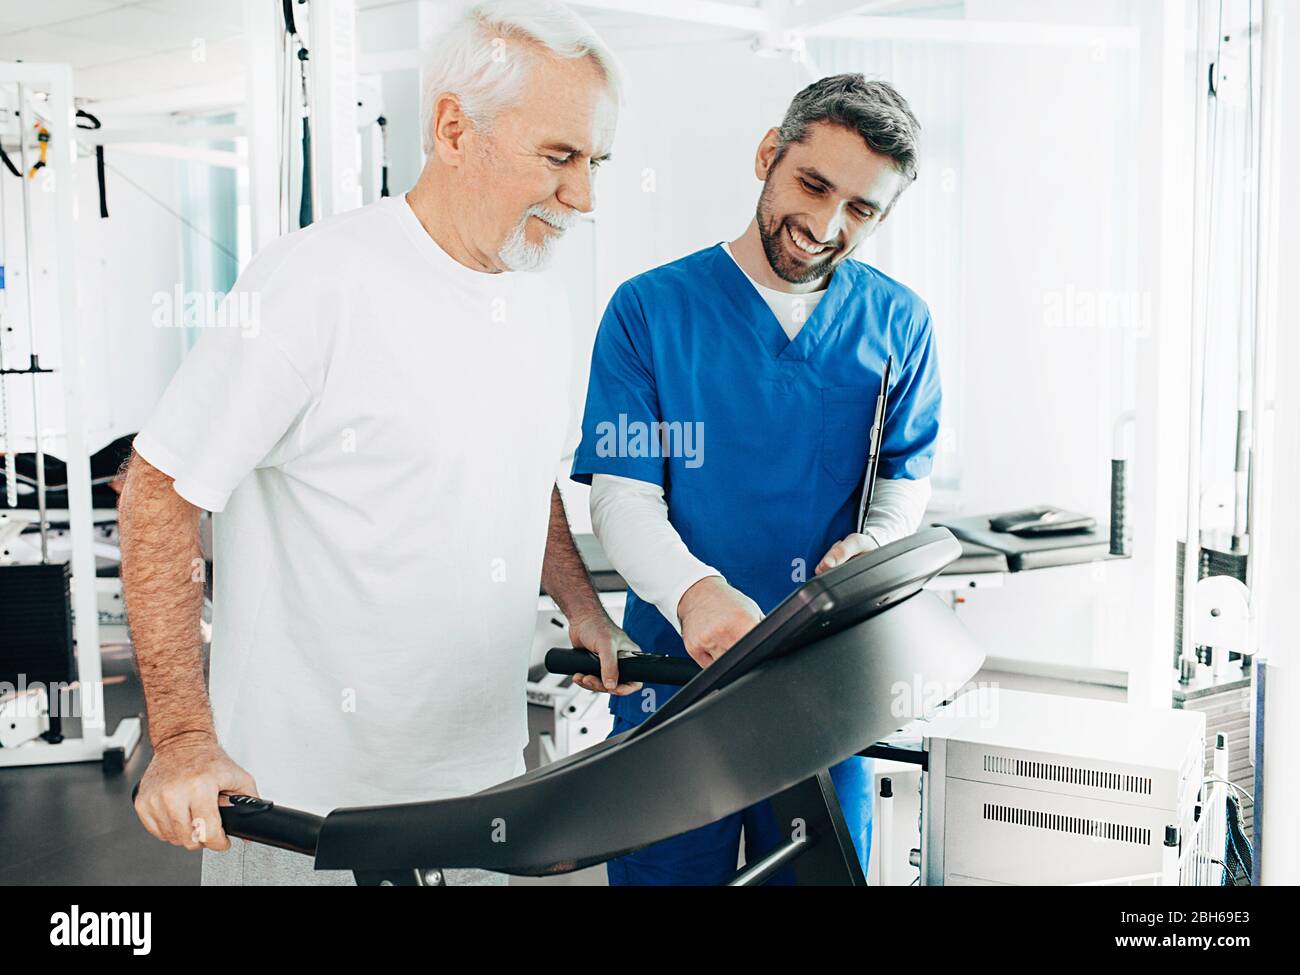 Senior patient having physical therapy with his therapist at hospital. Elderly man training on a treadmill. Stock Photo